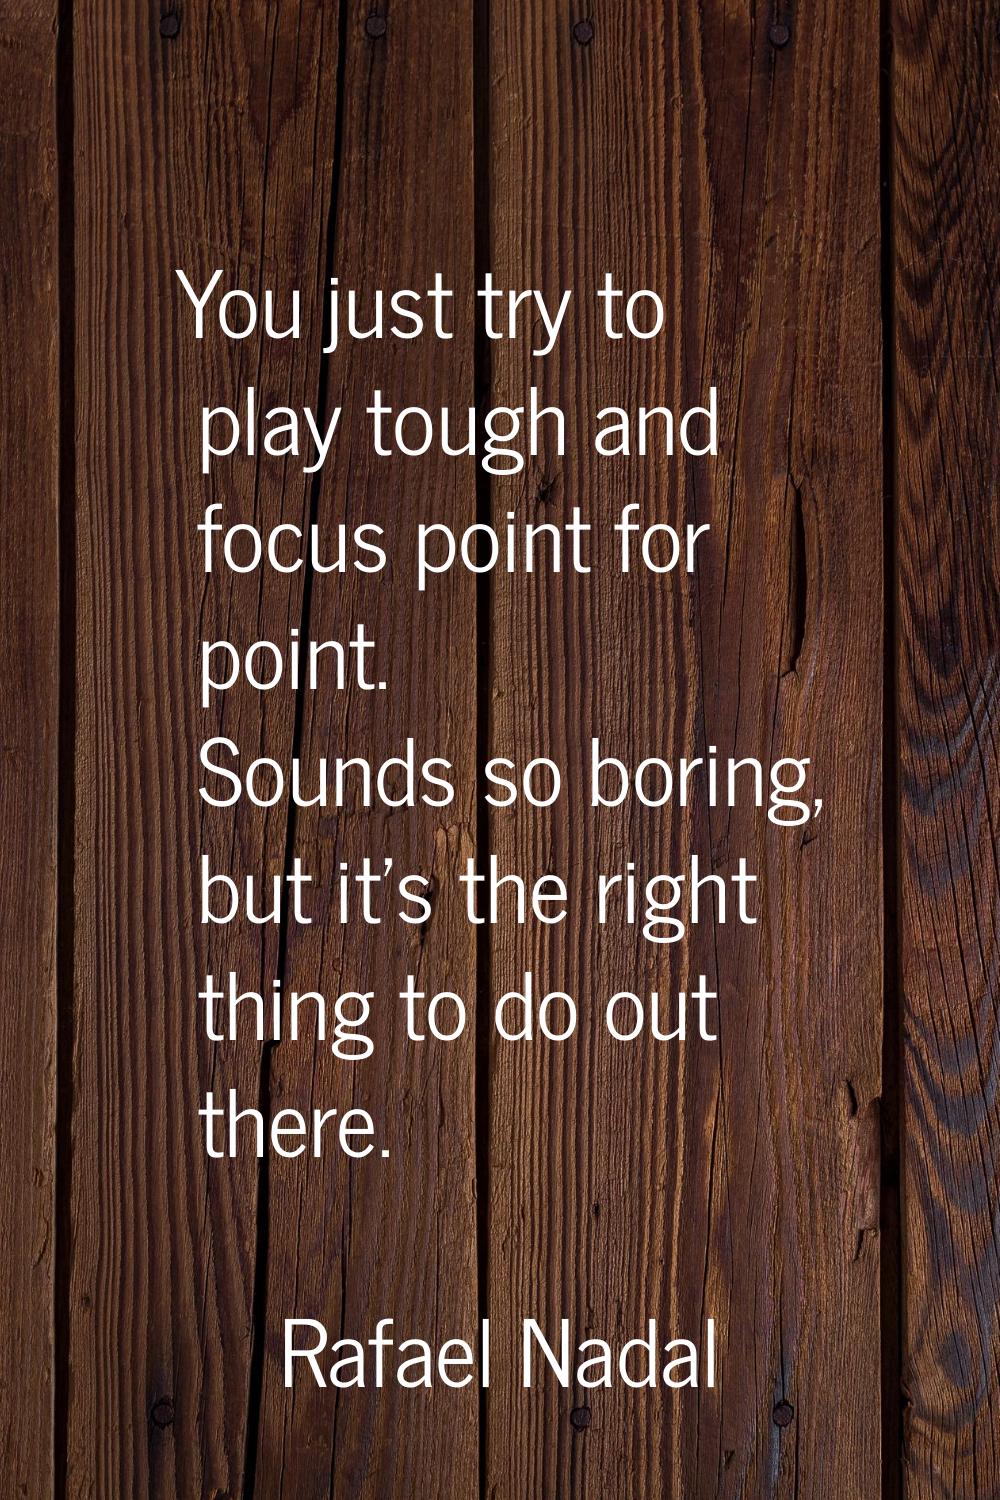 You just try to play tough and focus point for point. Sounds so boring, but it's the right thing to